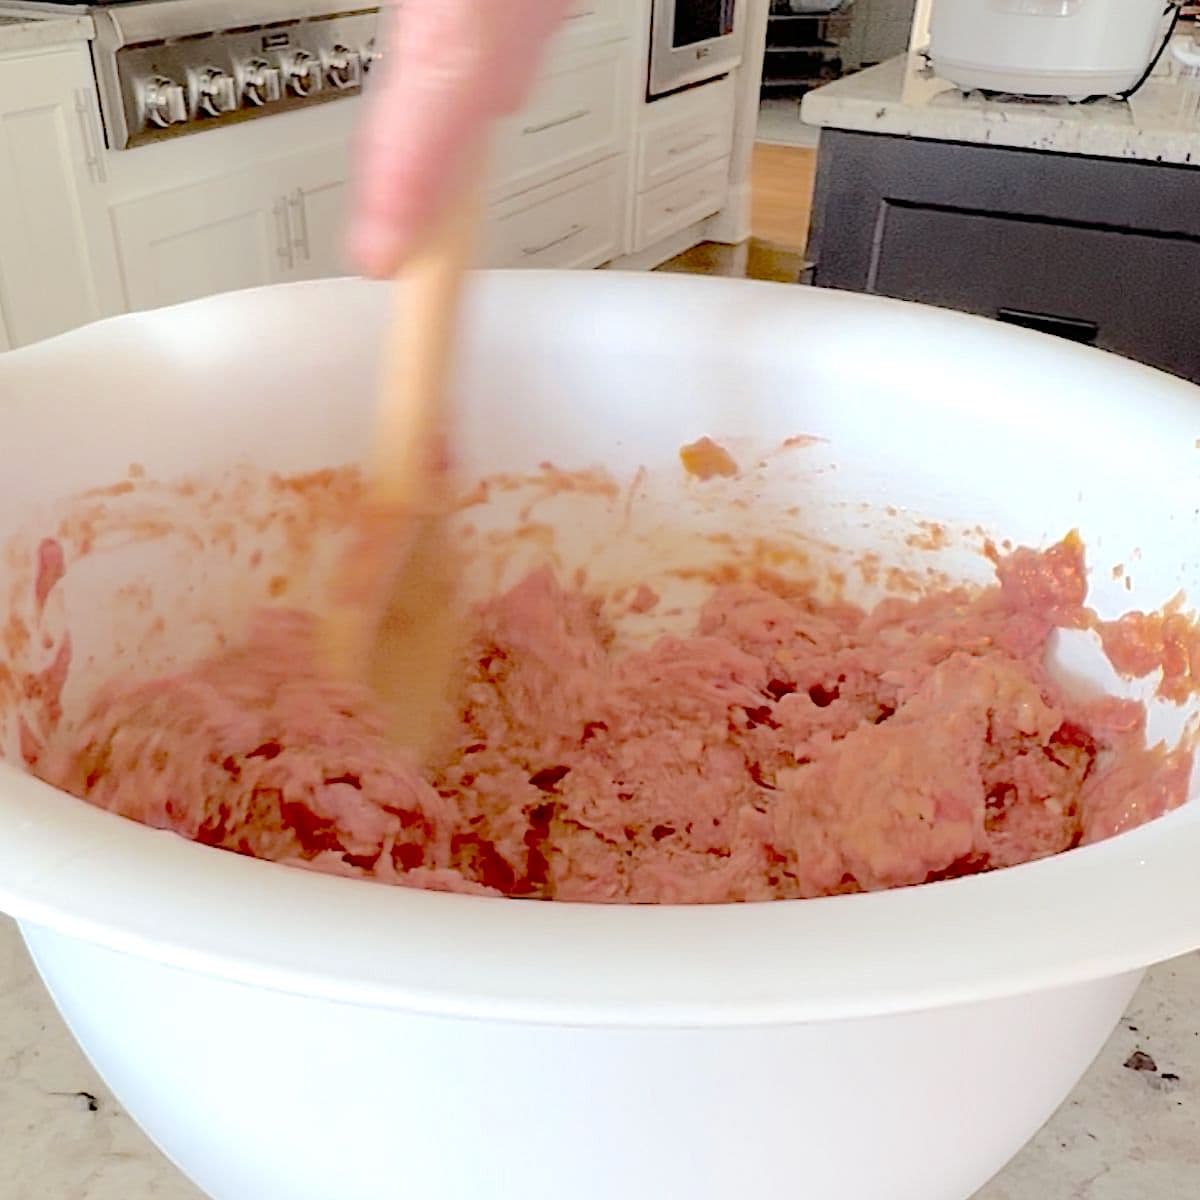 Mixing the meat loaf mixture in a white bowl.